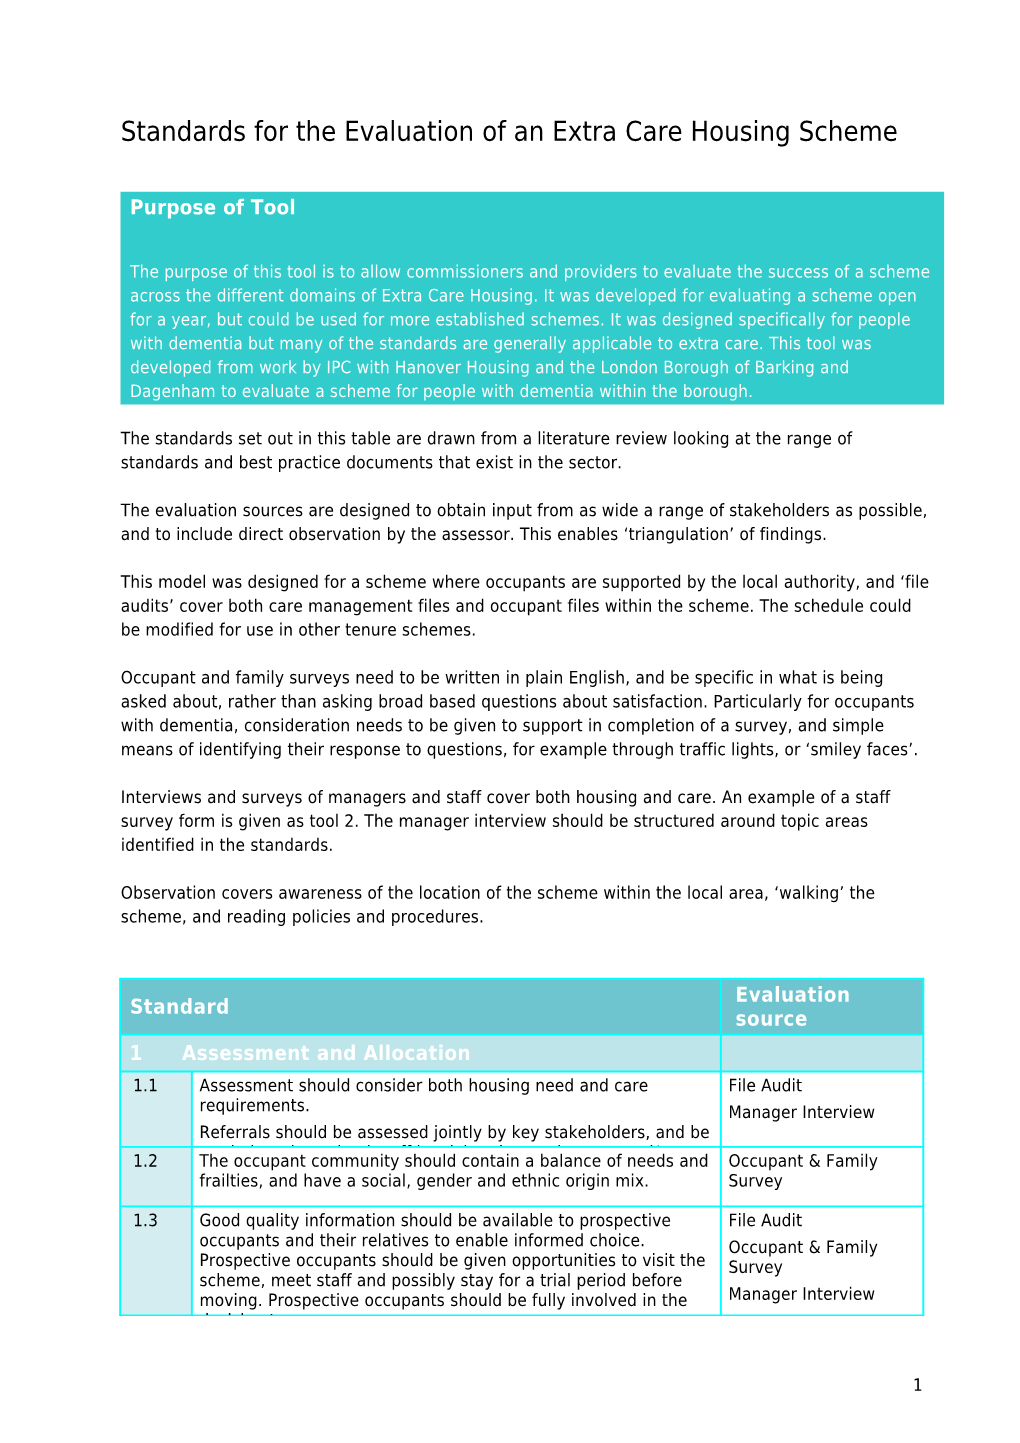 Standards for the Evaluation of an Extra Care Housing Scheme